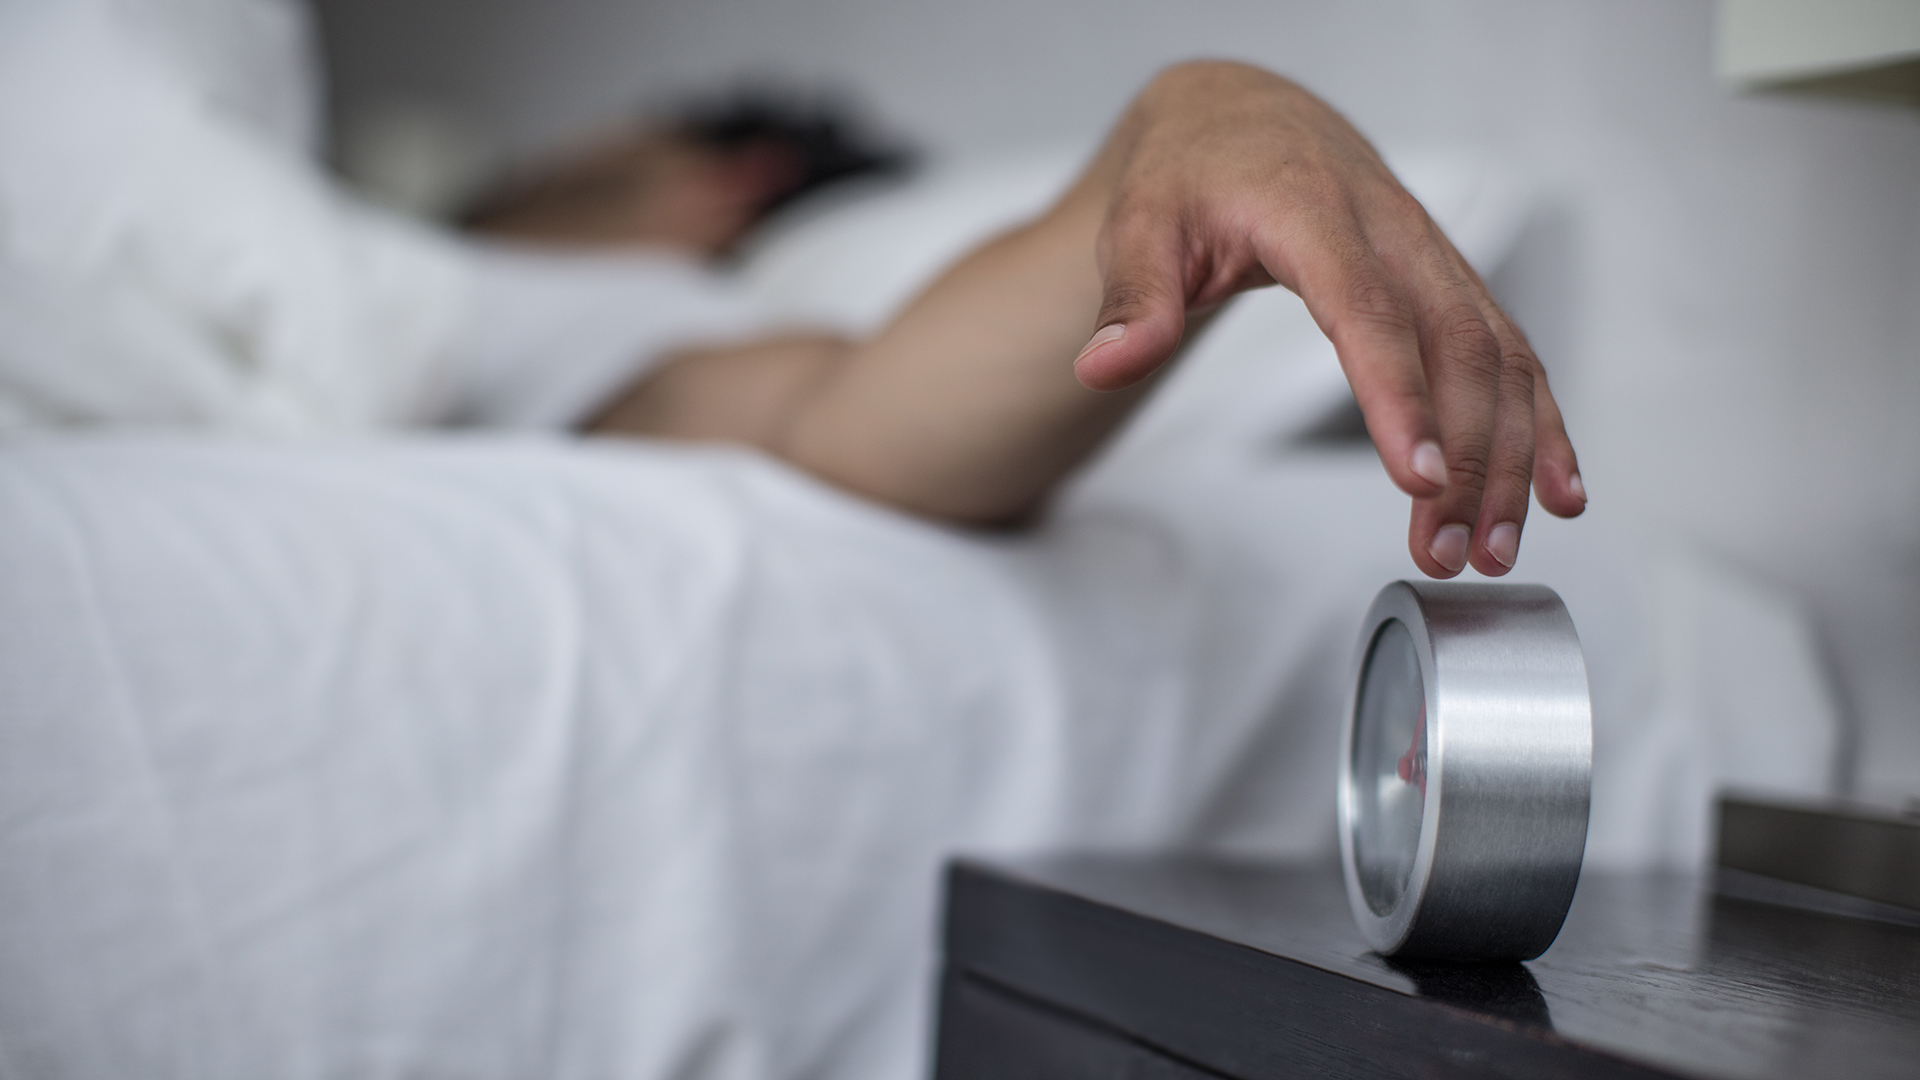 A man reaches out of bed to turn off his alarm clock